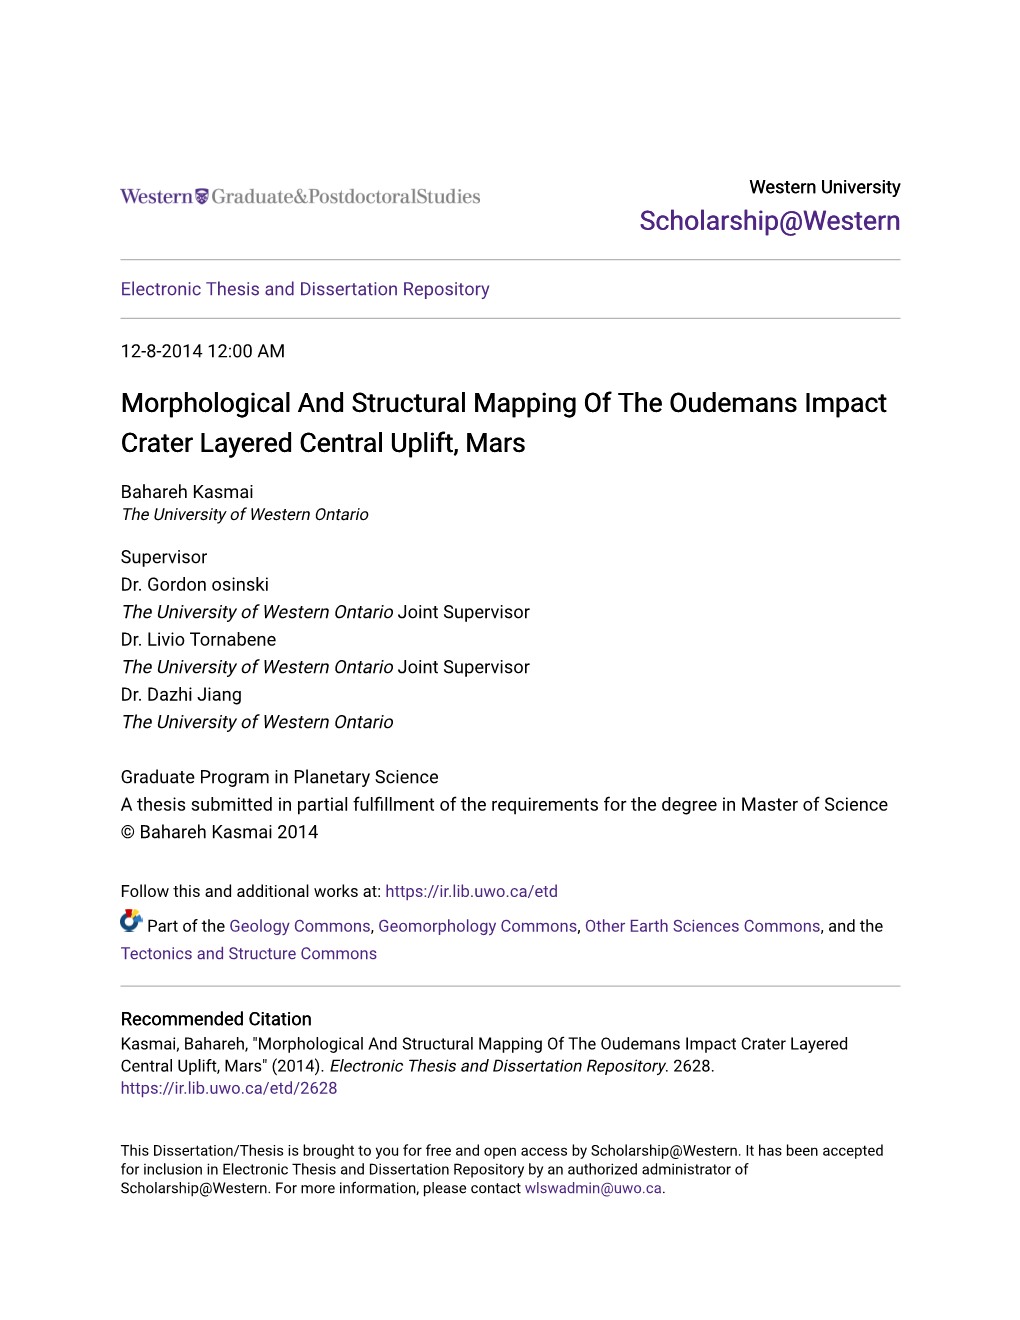 Morphological and Structural Mapping of the Oudemans Impact Crater Layered Central Uplift, Mars